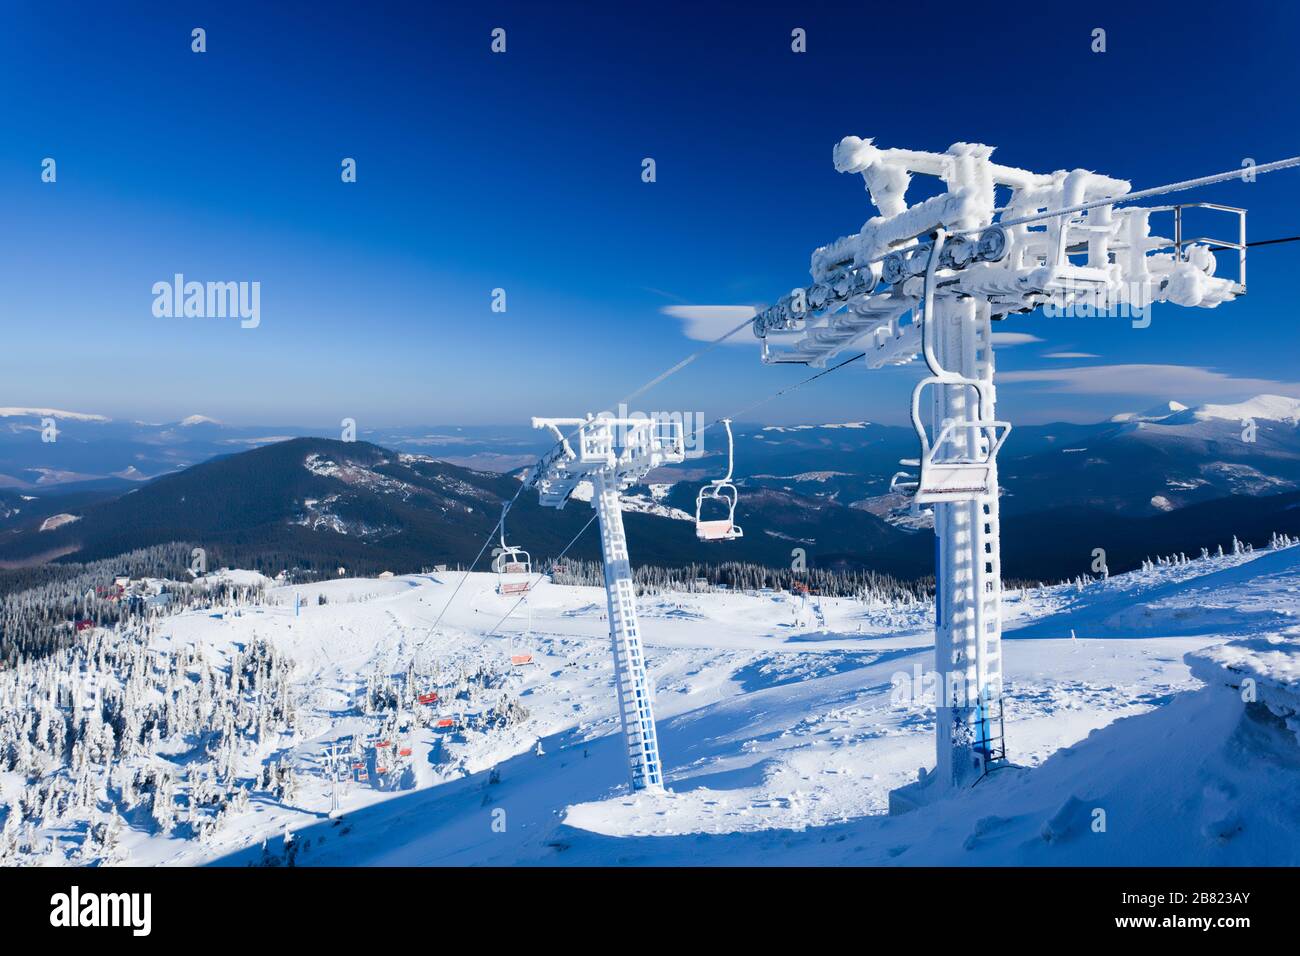 https://c8.alamy.com/comp/2B823AY/empty-ski-lift-covered-with-frost-and-snow-with-mountains-at-background-on-sunny-clear-winter-day-with-blue-sky-travelling-and-winter-activities-conc-2B823AY.jpg